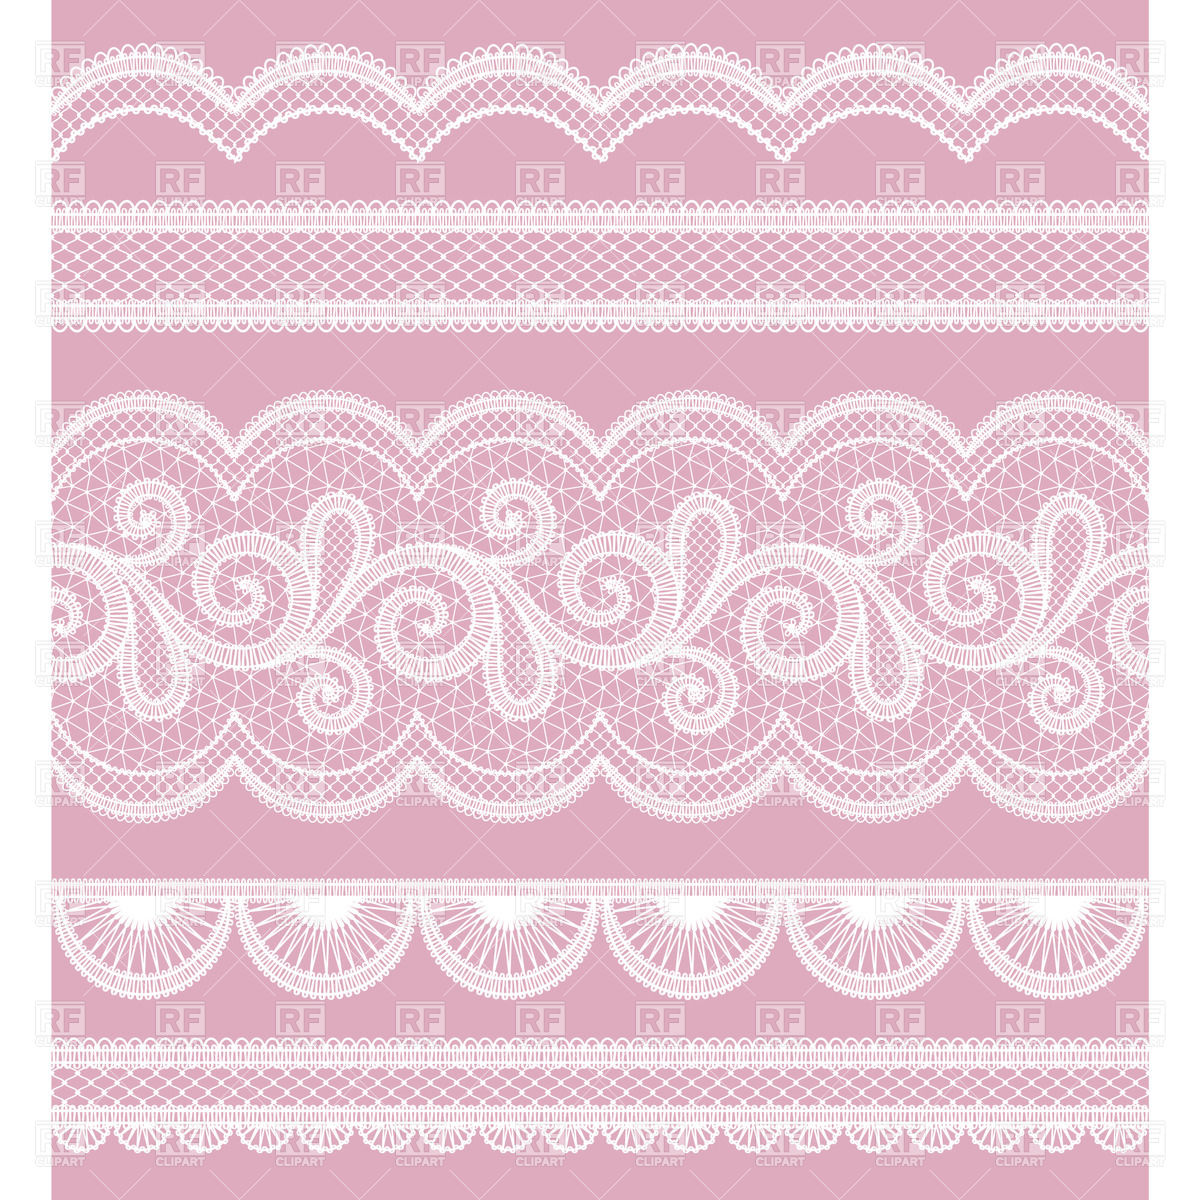 Ornate Pink Lace Borders 28648 Borders And Frames Download Royalty